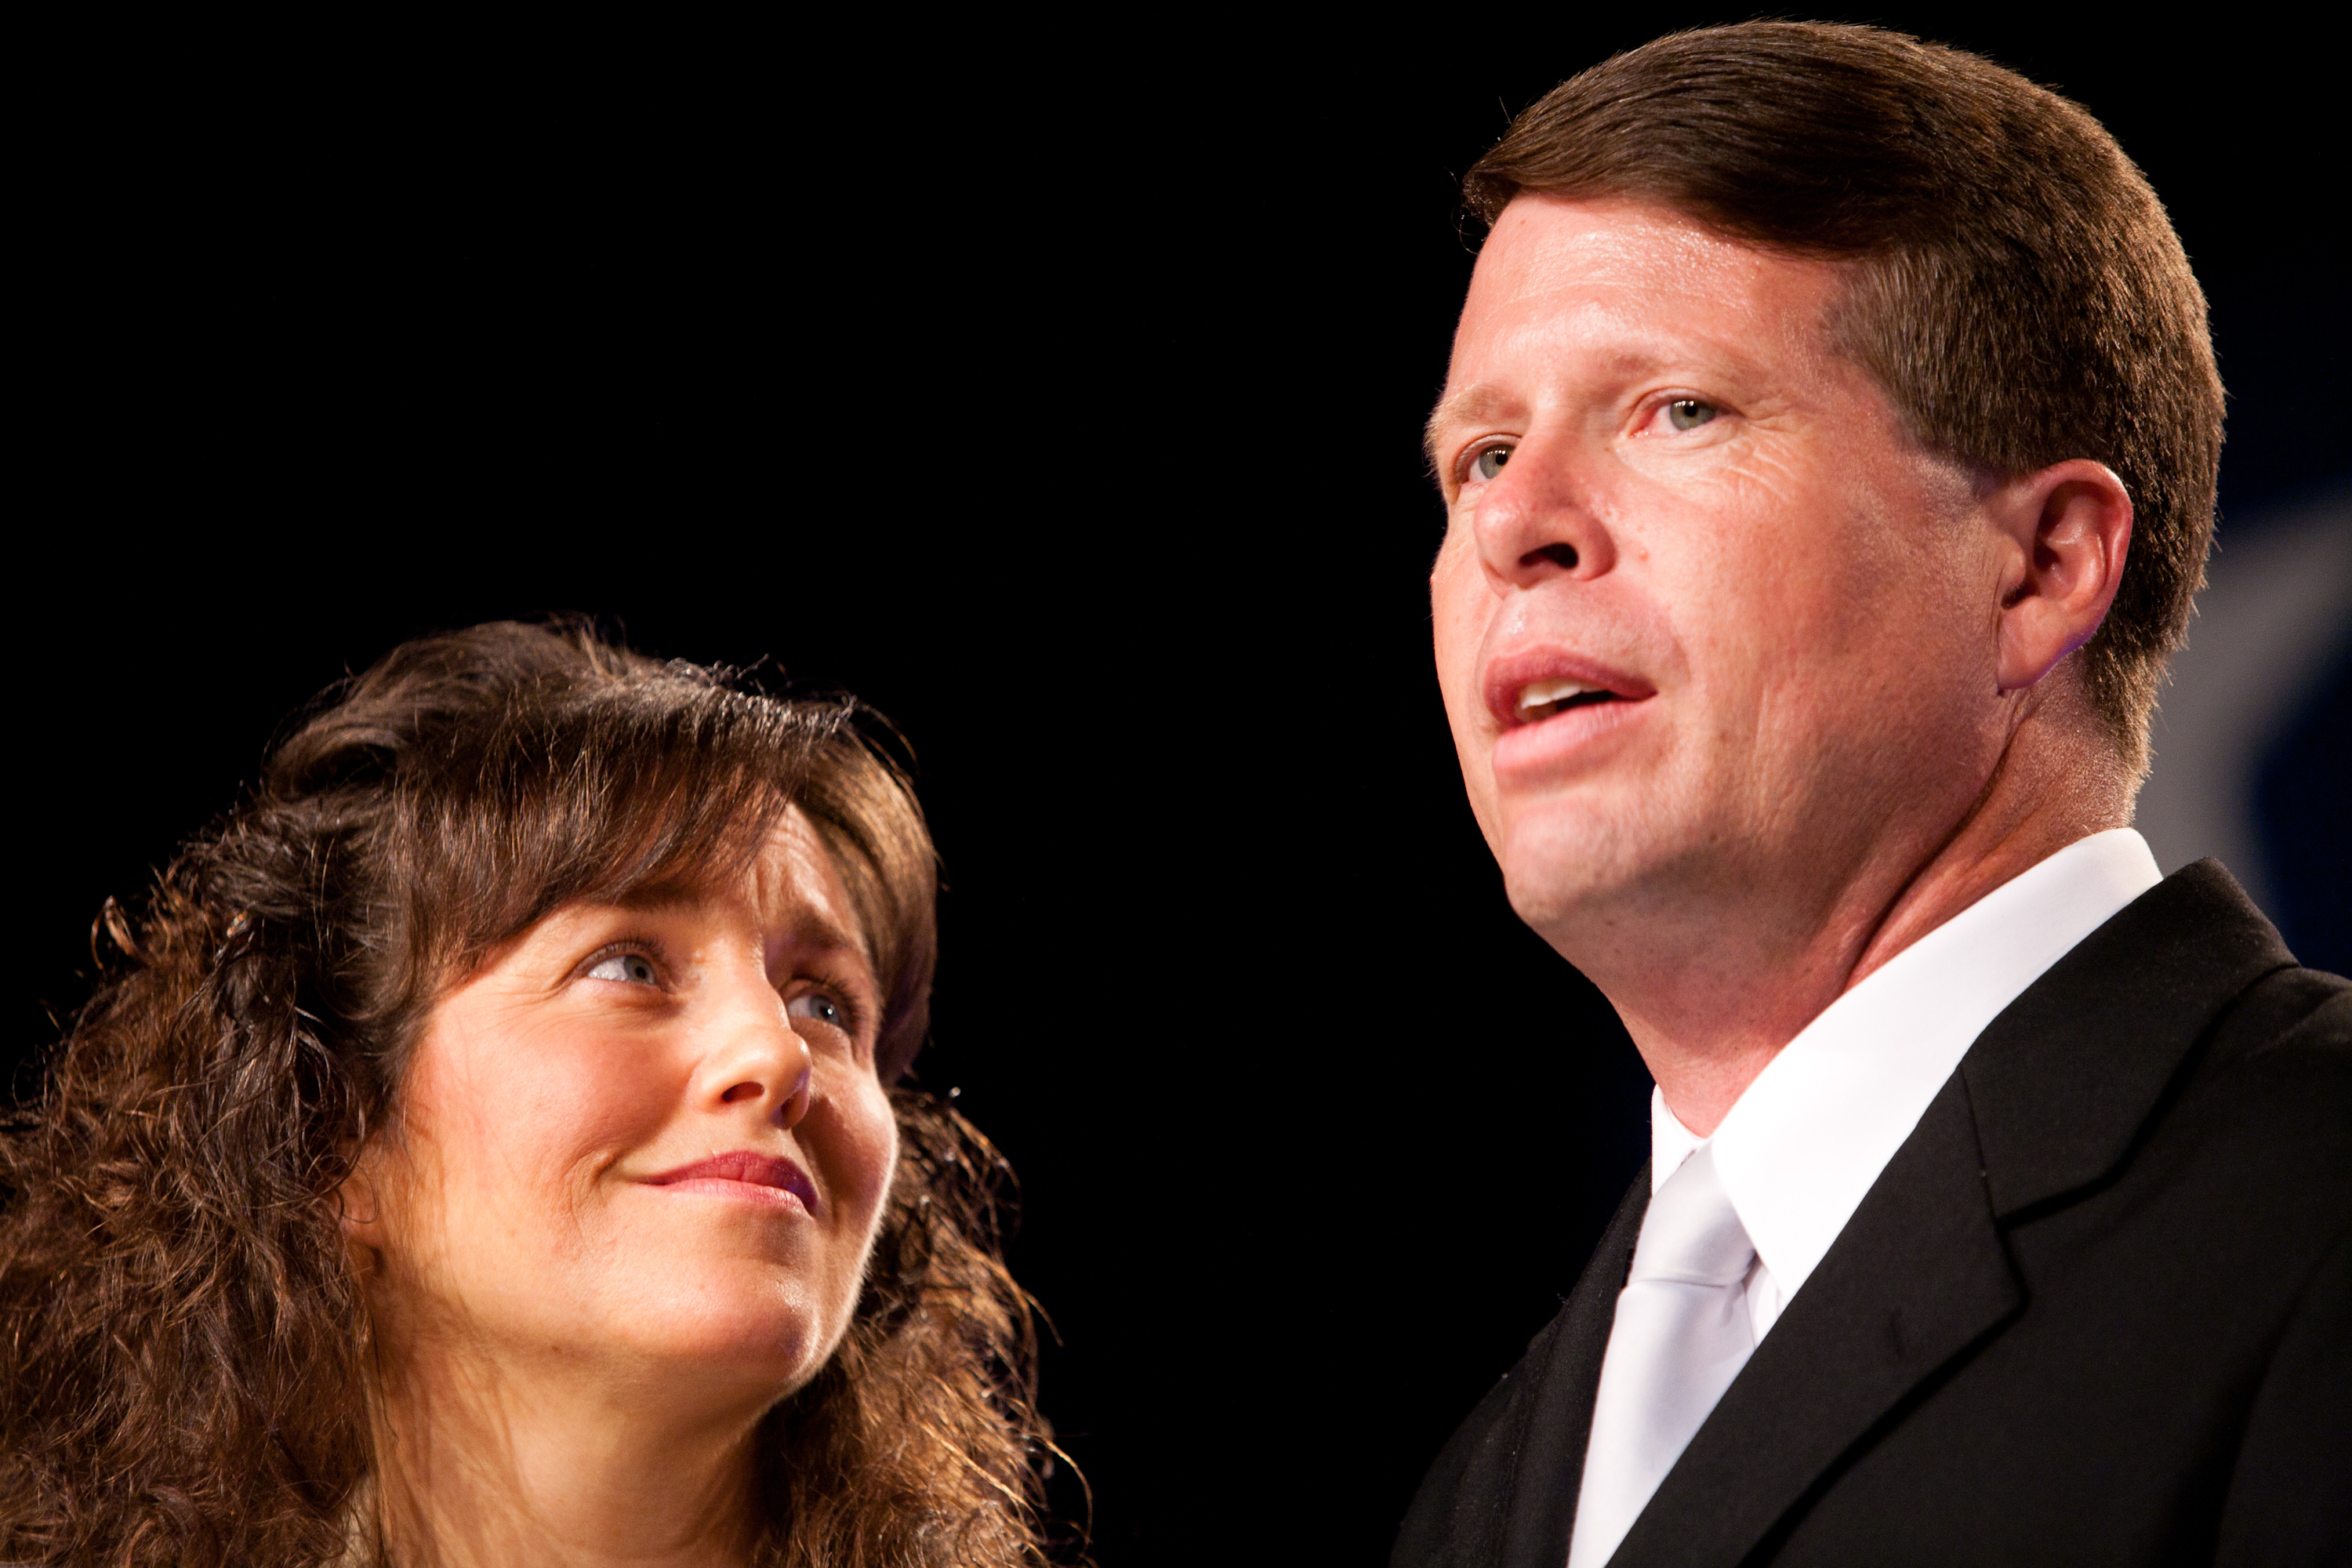 Jim Bob and Michelle Duggar at the Values Voter Summit in 2010